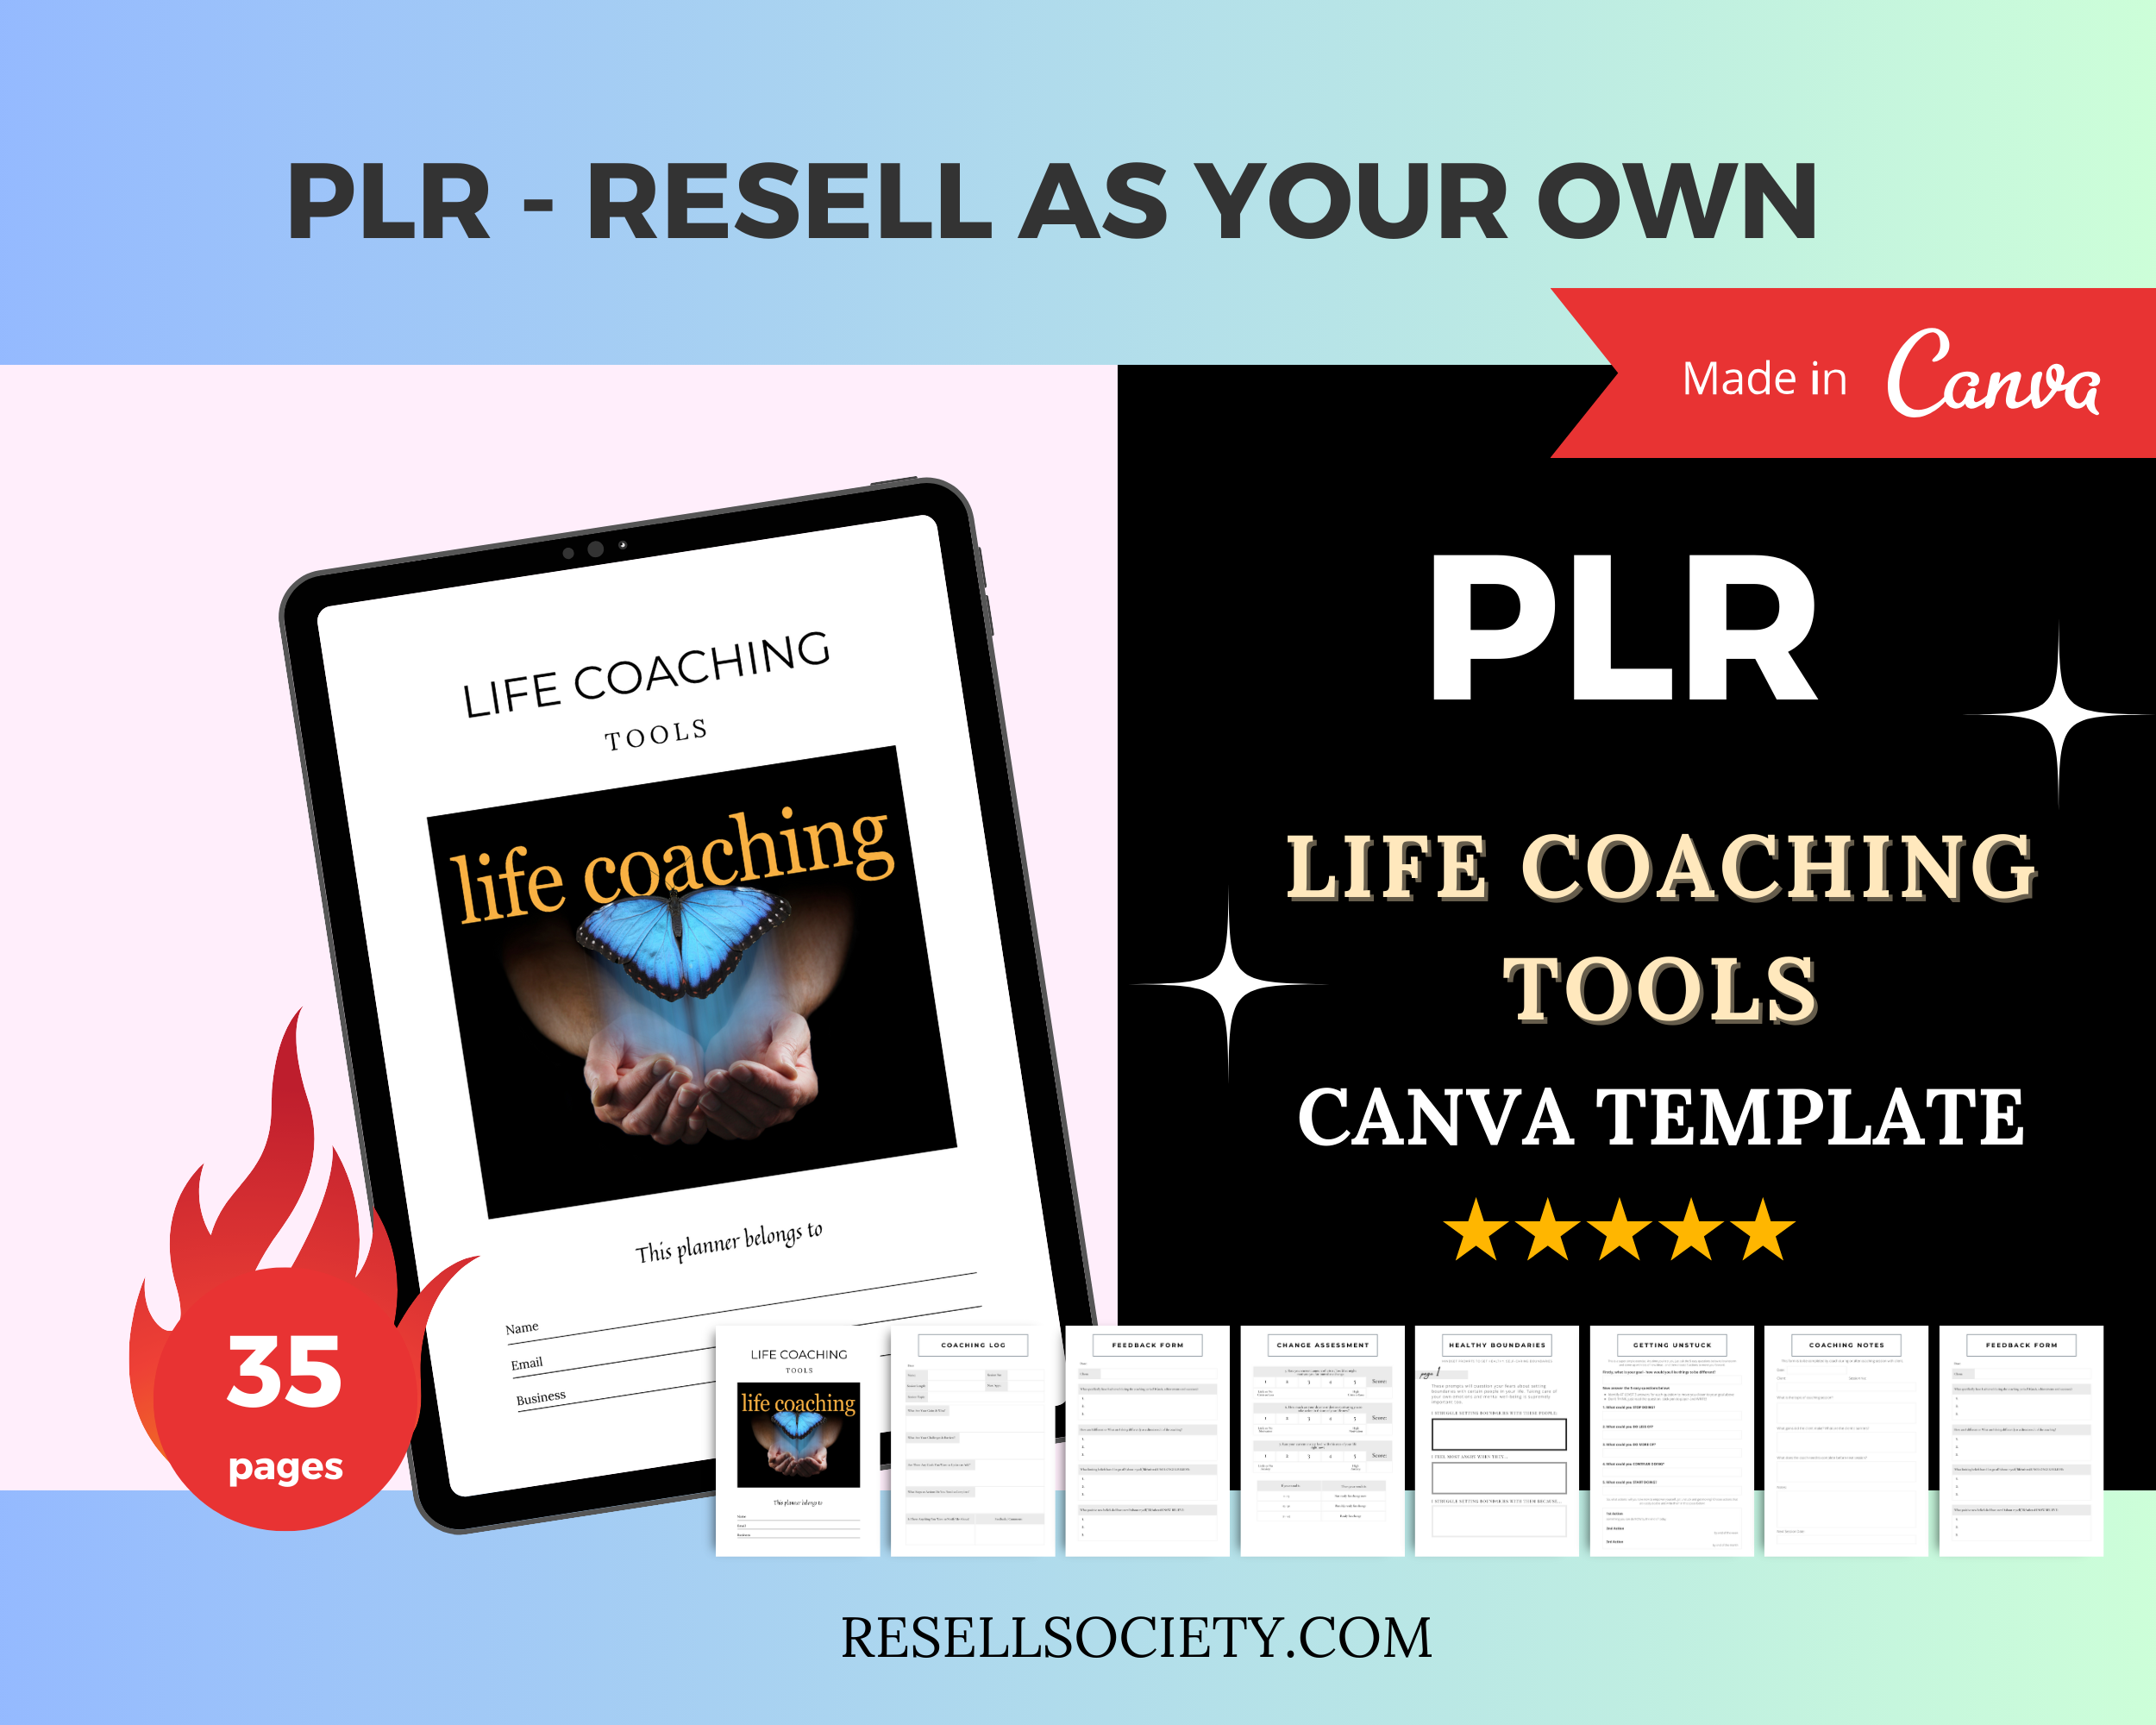 Editable Life Coaching Tools in Canva | Commercial Use